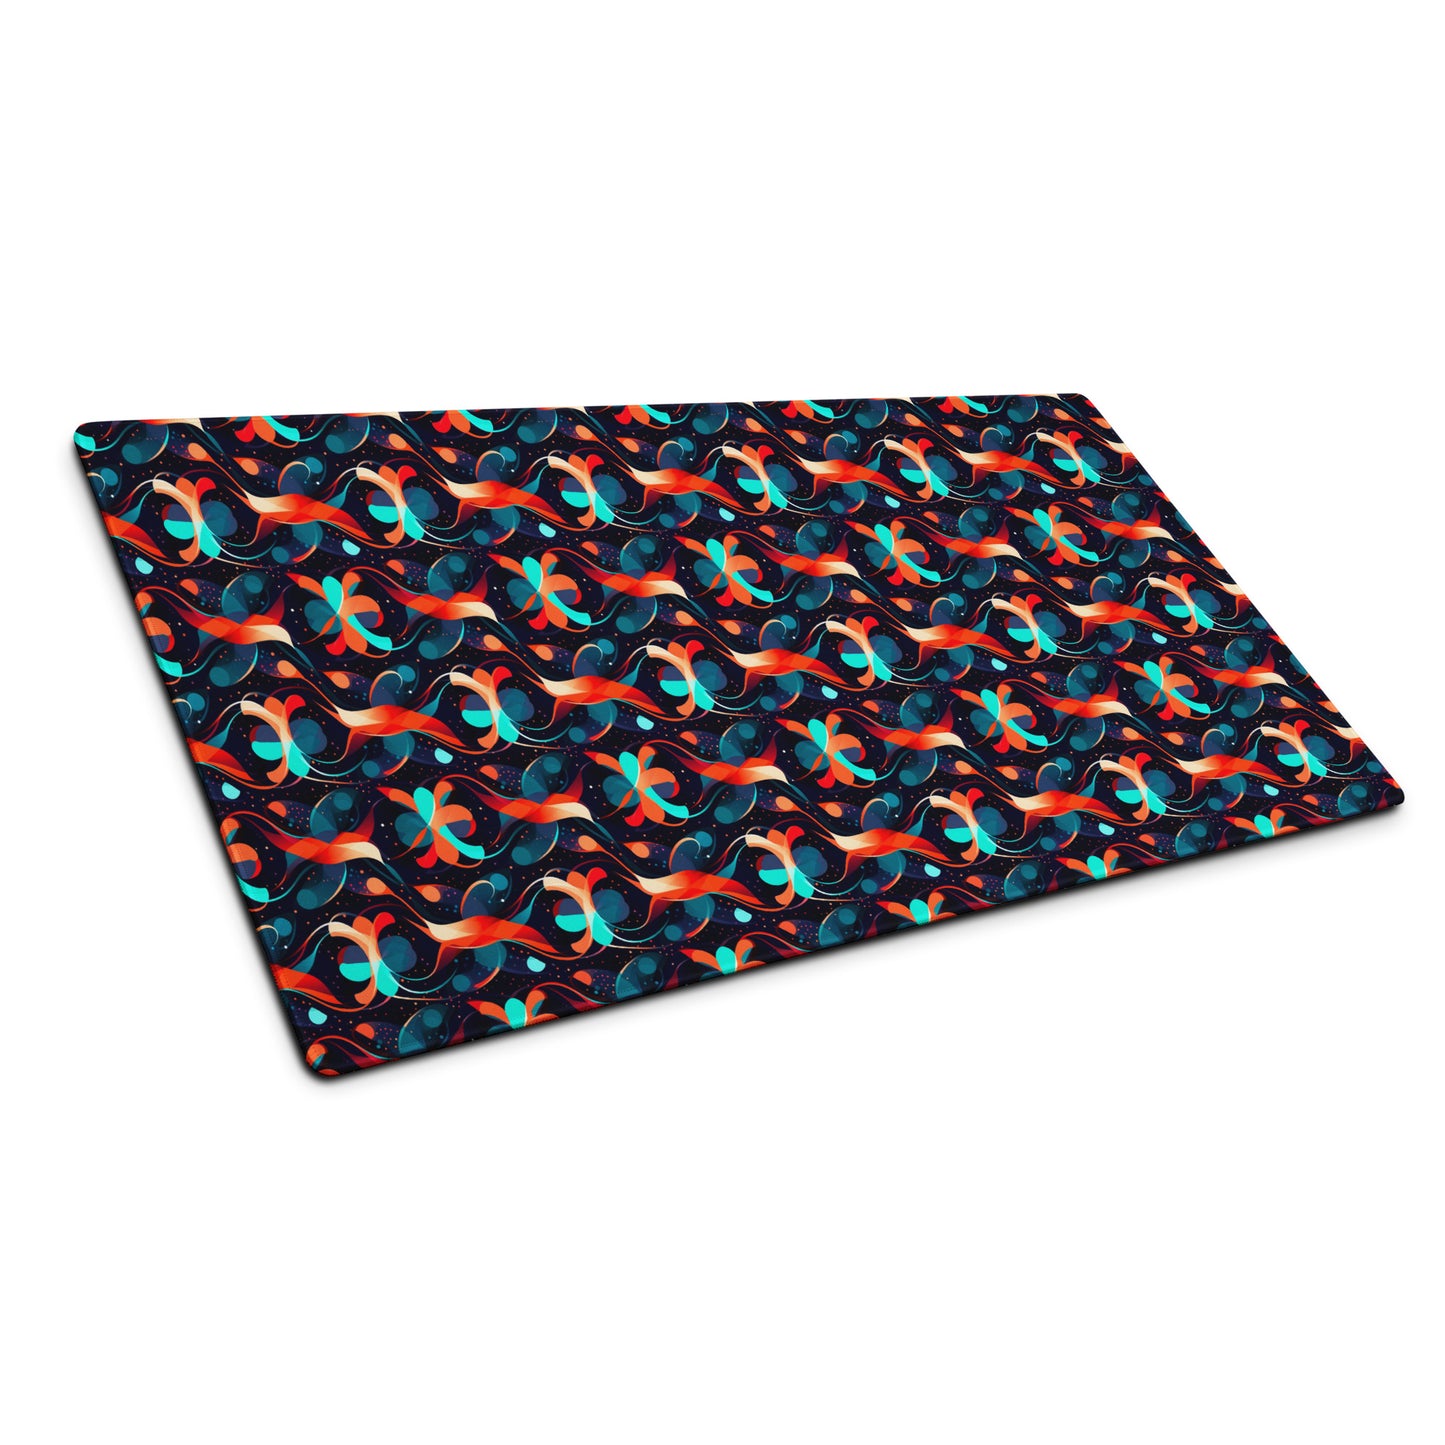 A 36" x 18" desk pad with a wavy orange and blue pattern sitting at an angle.